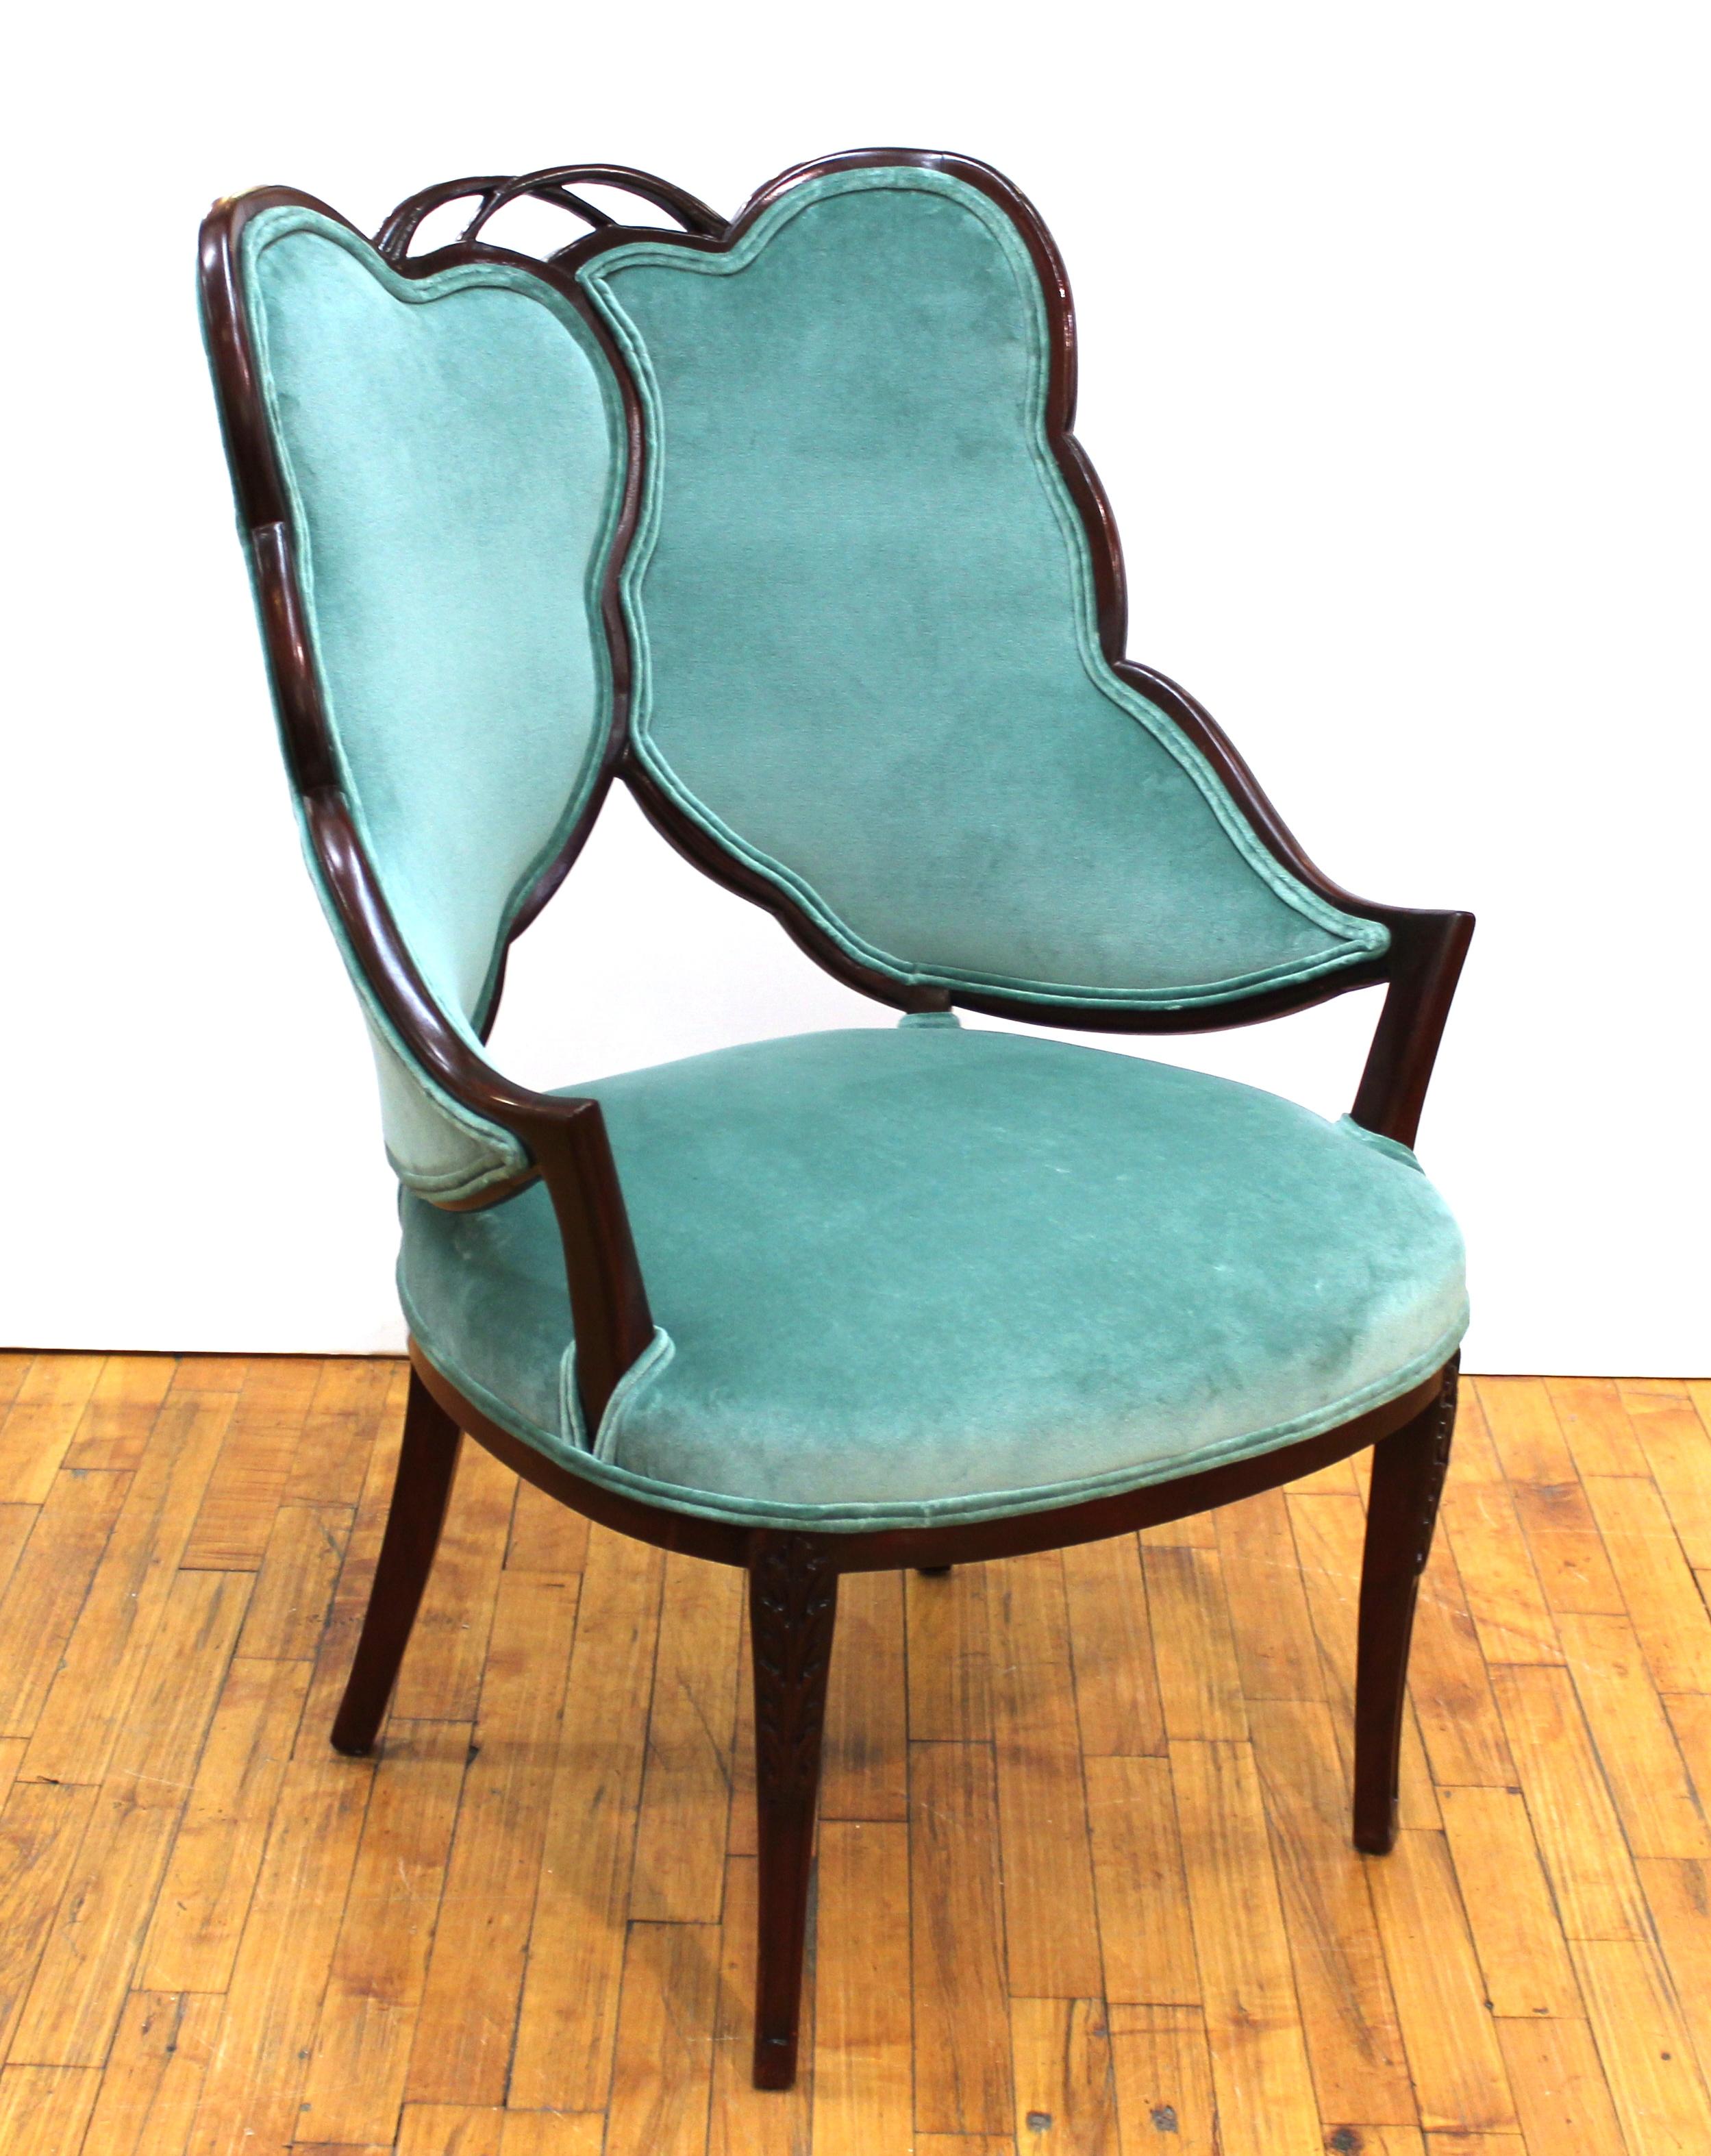 French Art Deco Mahogany Chairs in Jade Green Velvet with Leaf Design 5